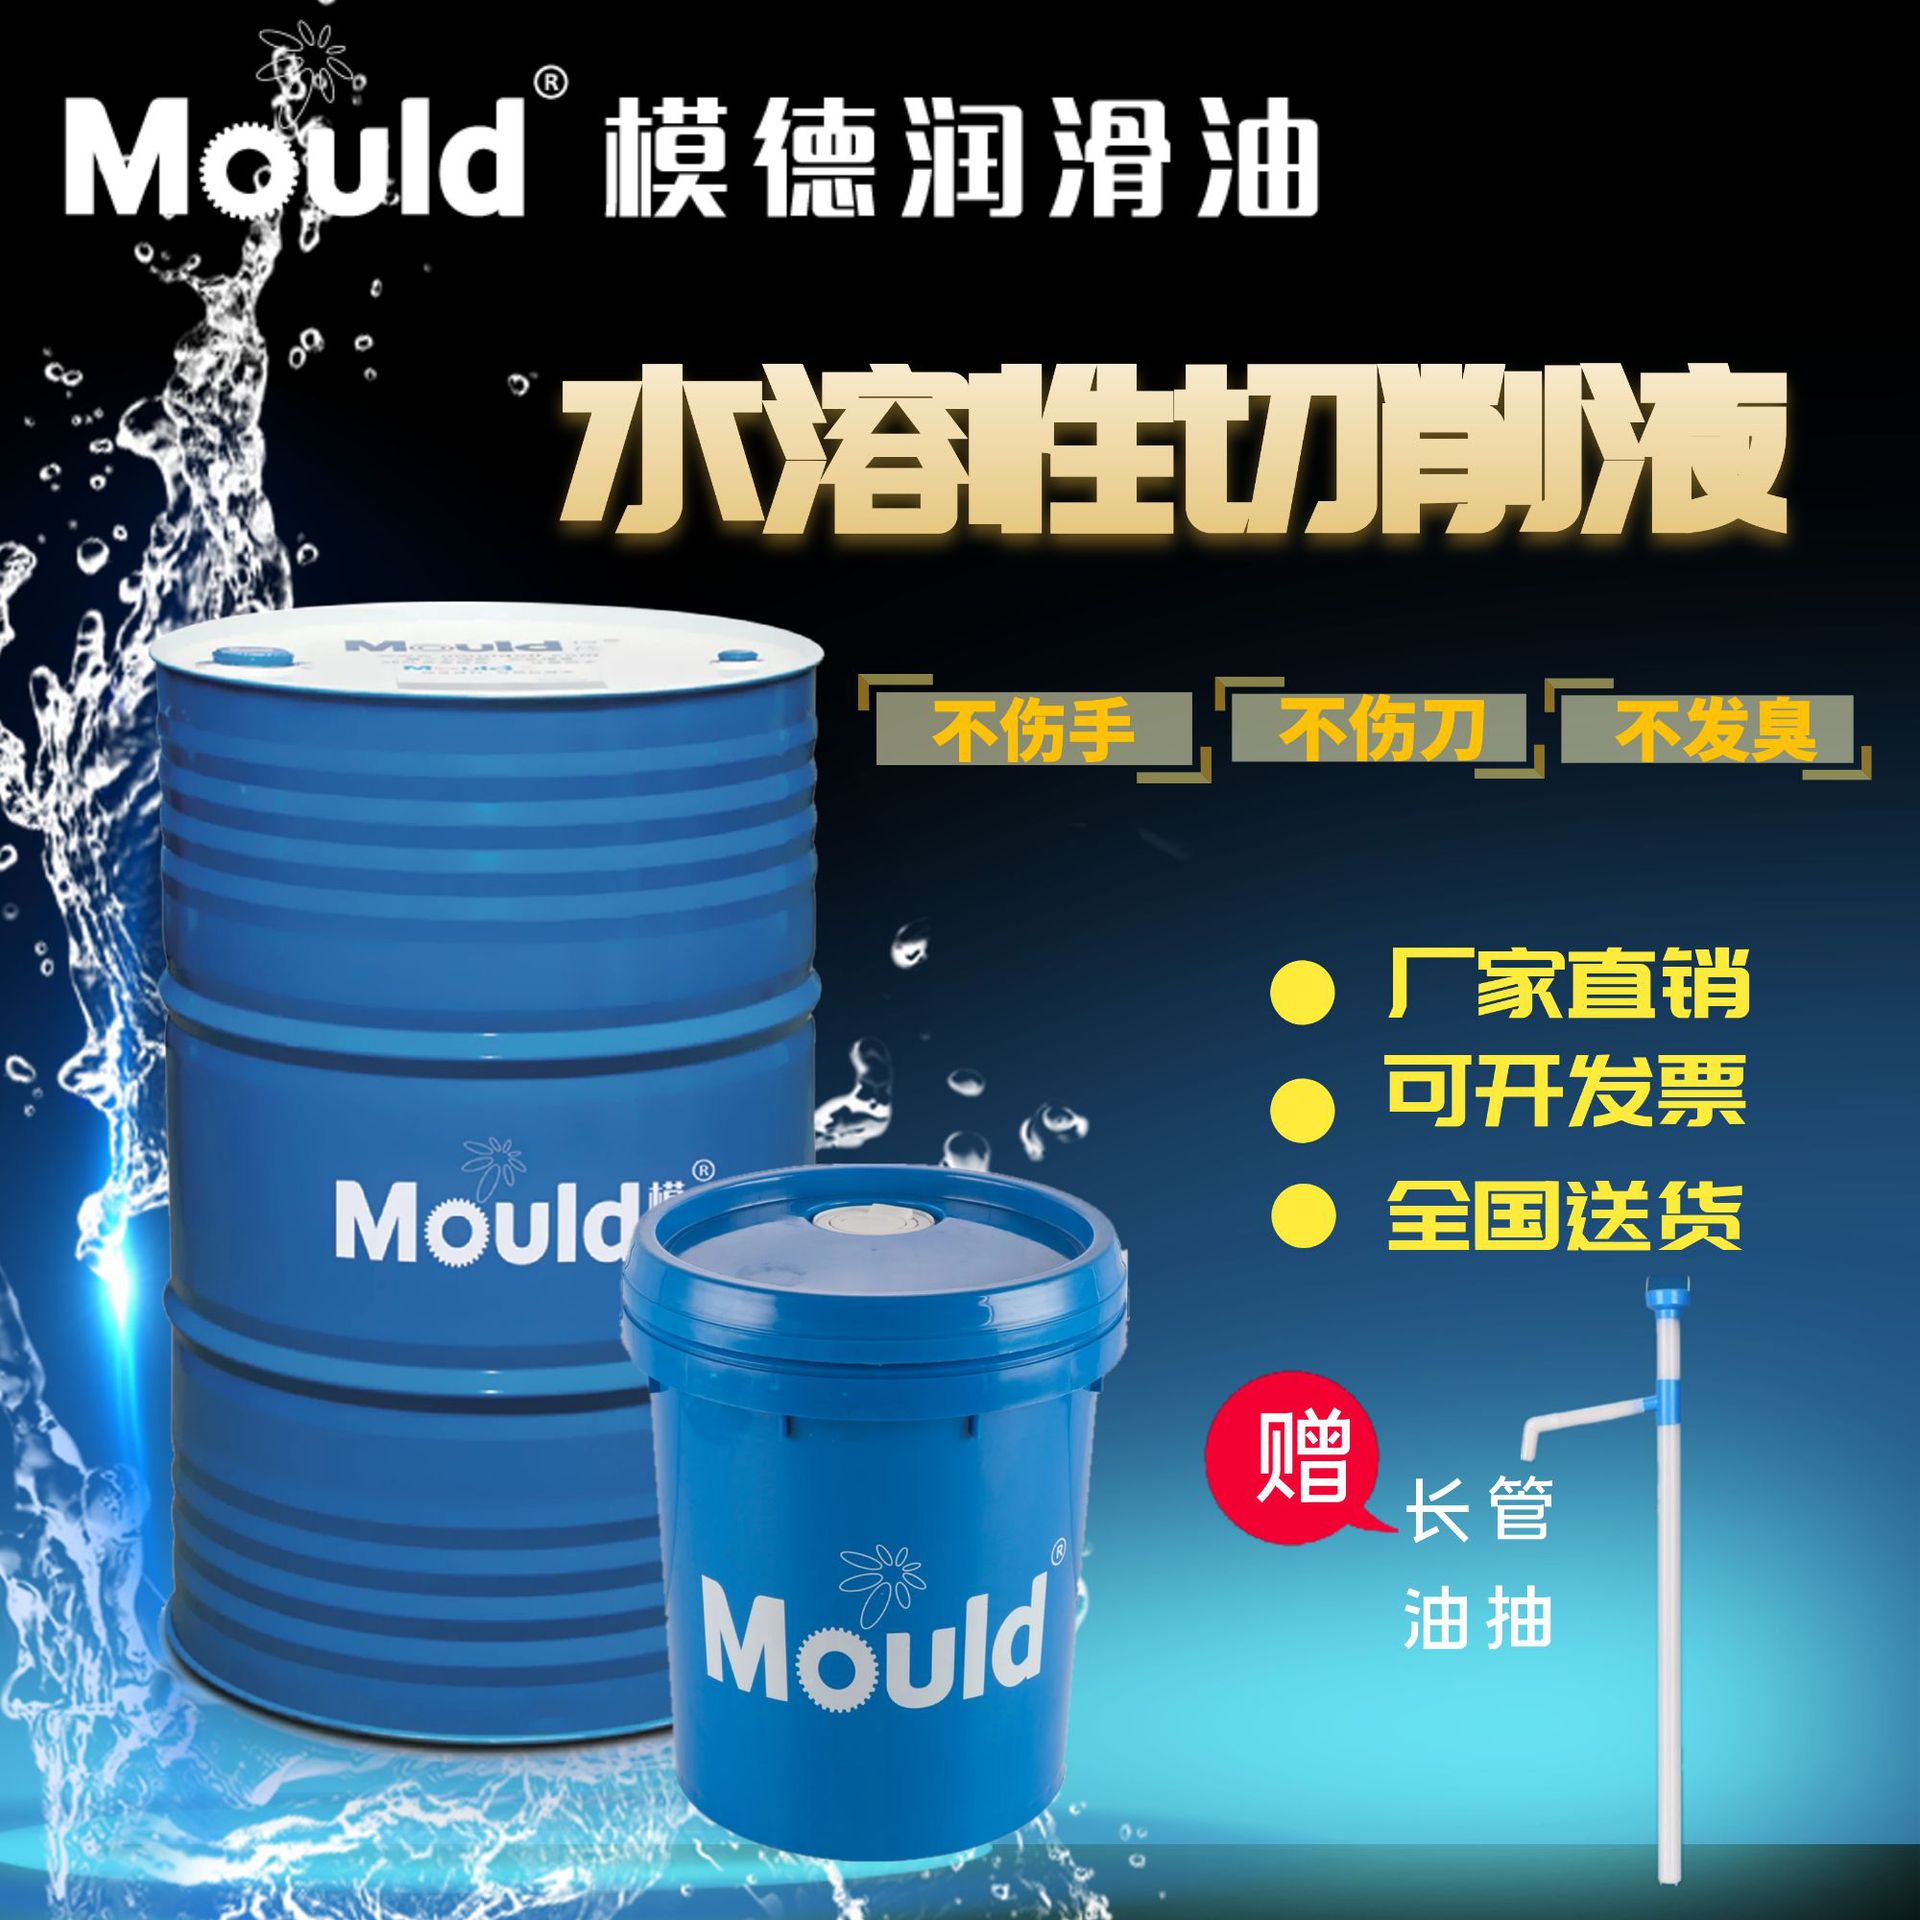 Mode 5503 Total Synthesis environmental protection Water solubility cutting fluid Metal coolant Antirust cast iron Grinding fluid